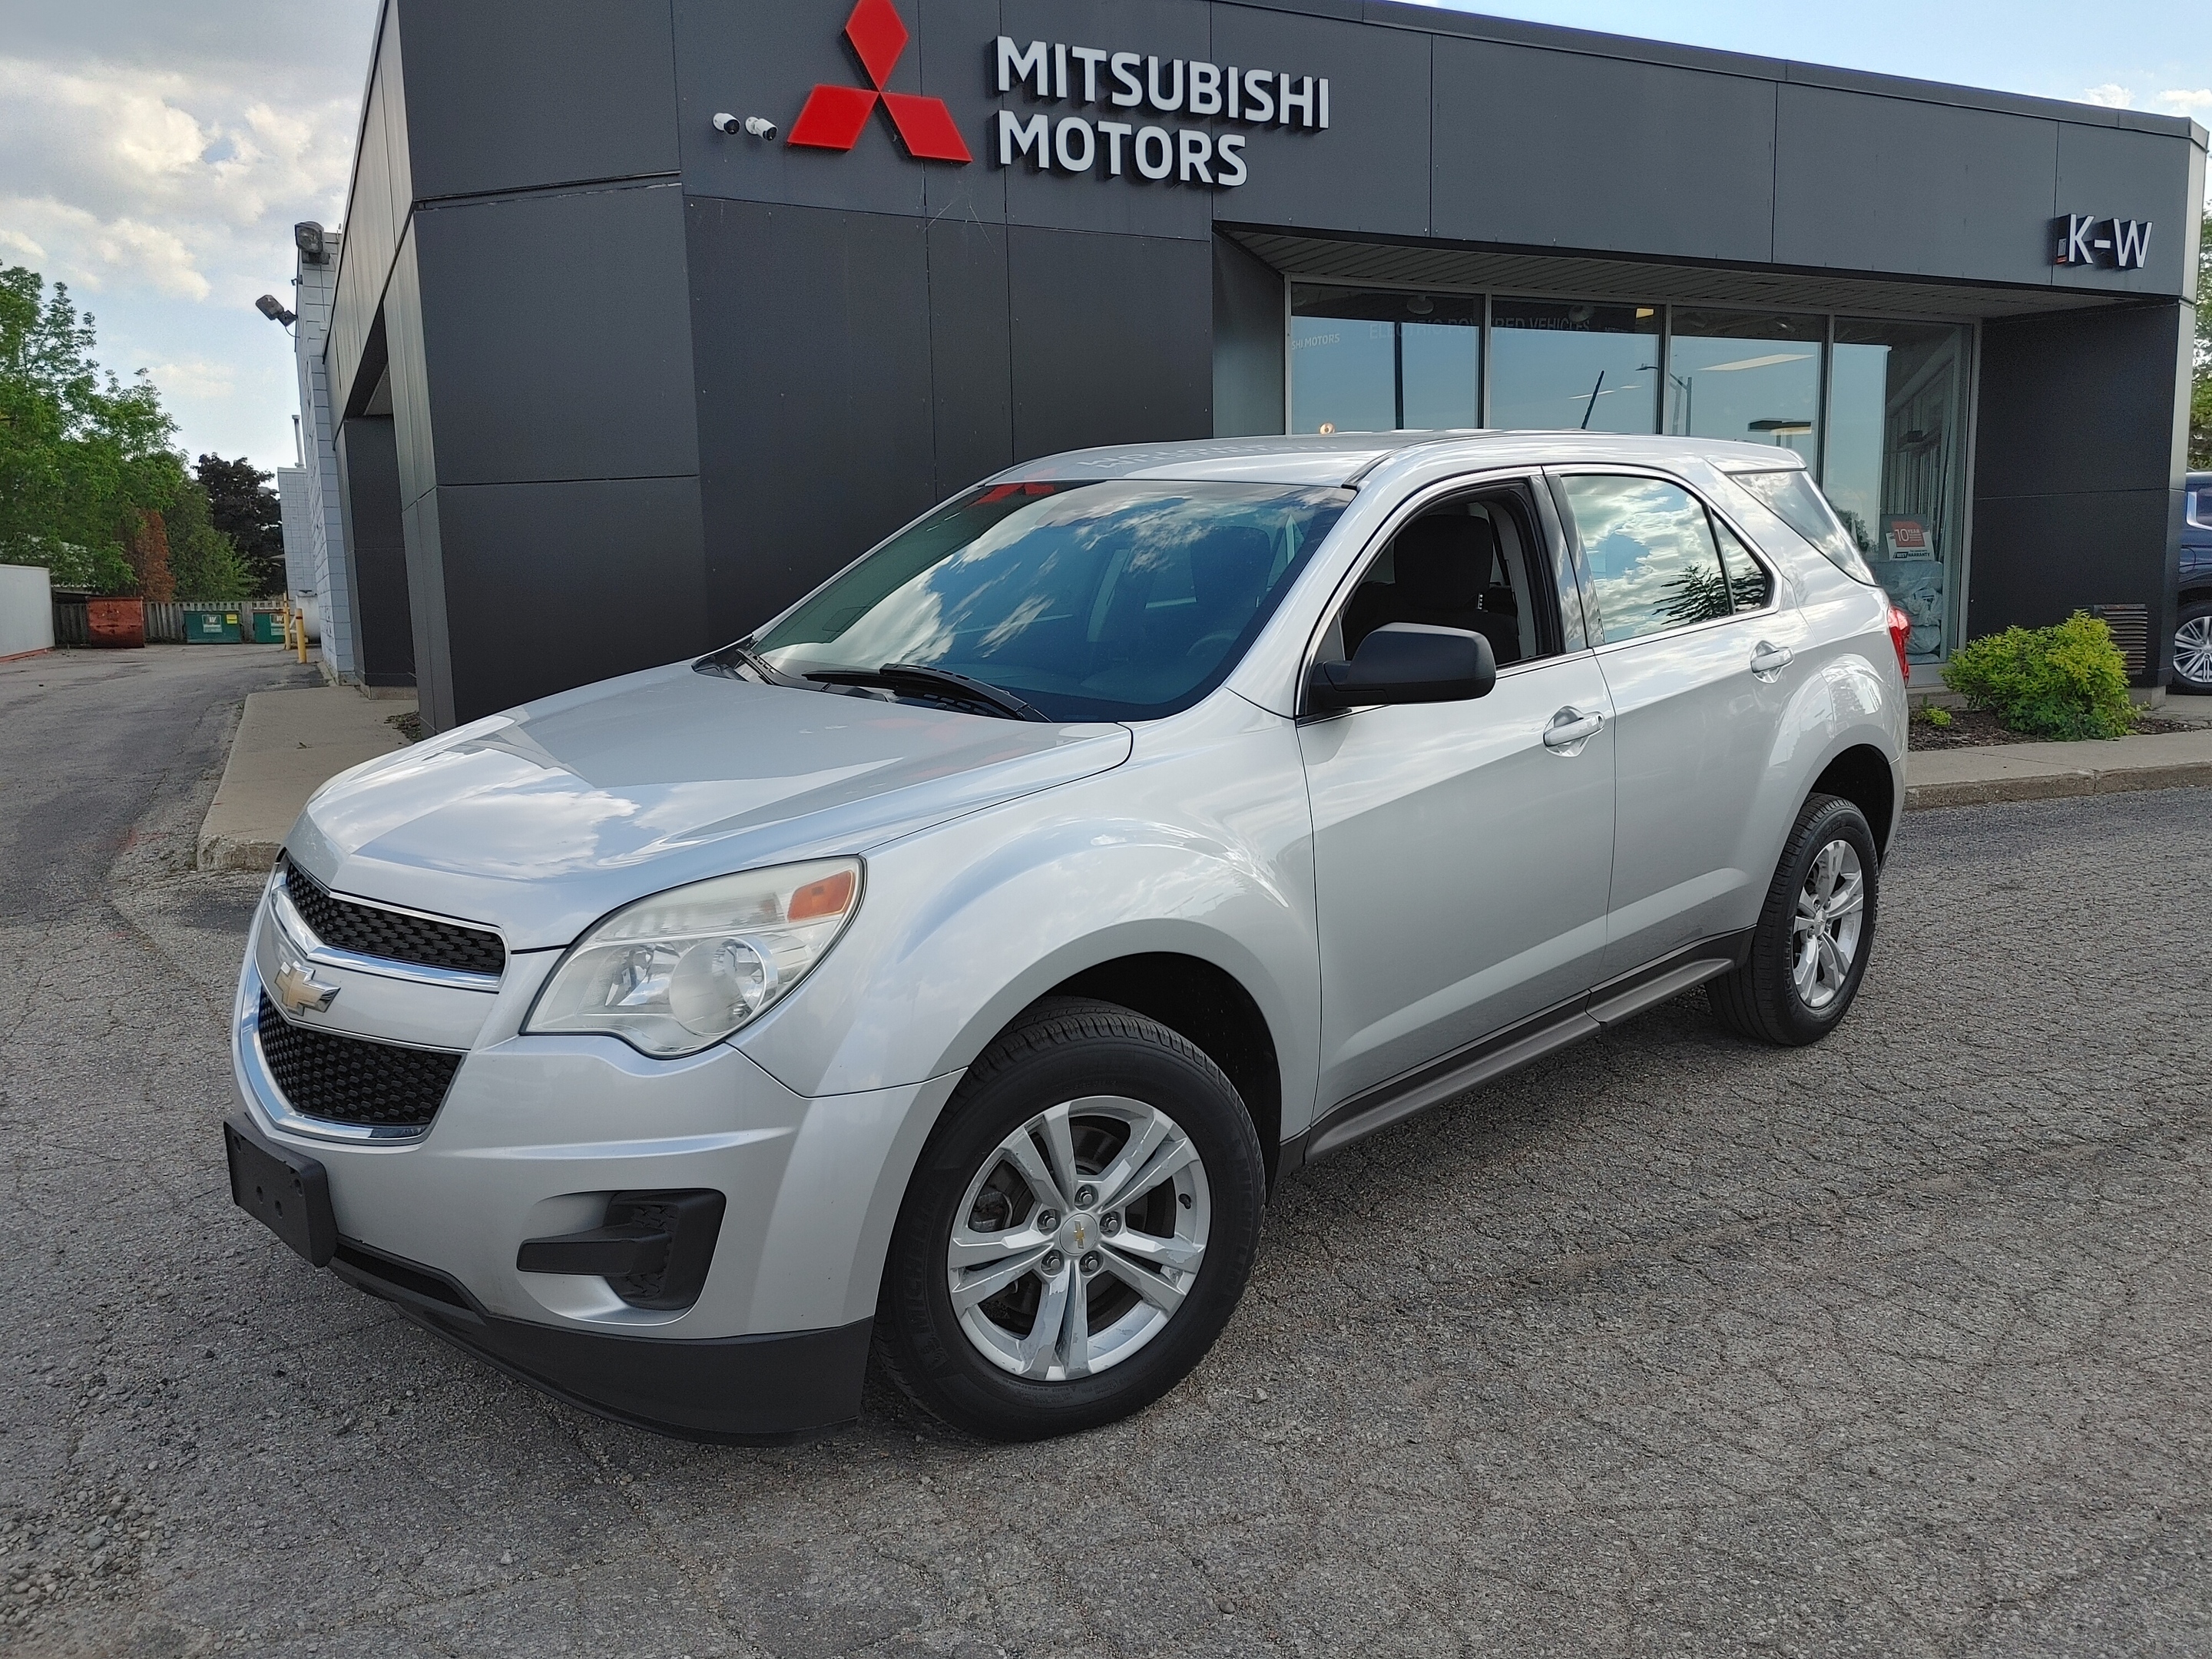 2015 Chevrolet Equinox FWD 4dr LS, LOW KMS!!